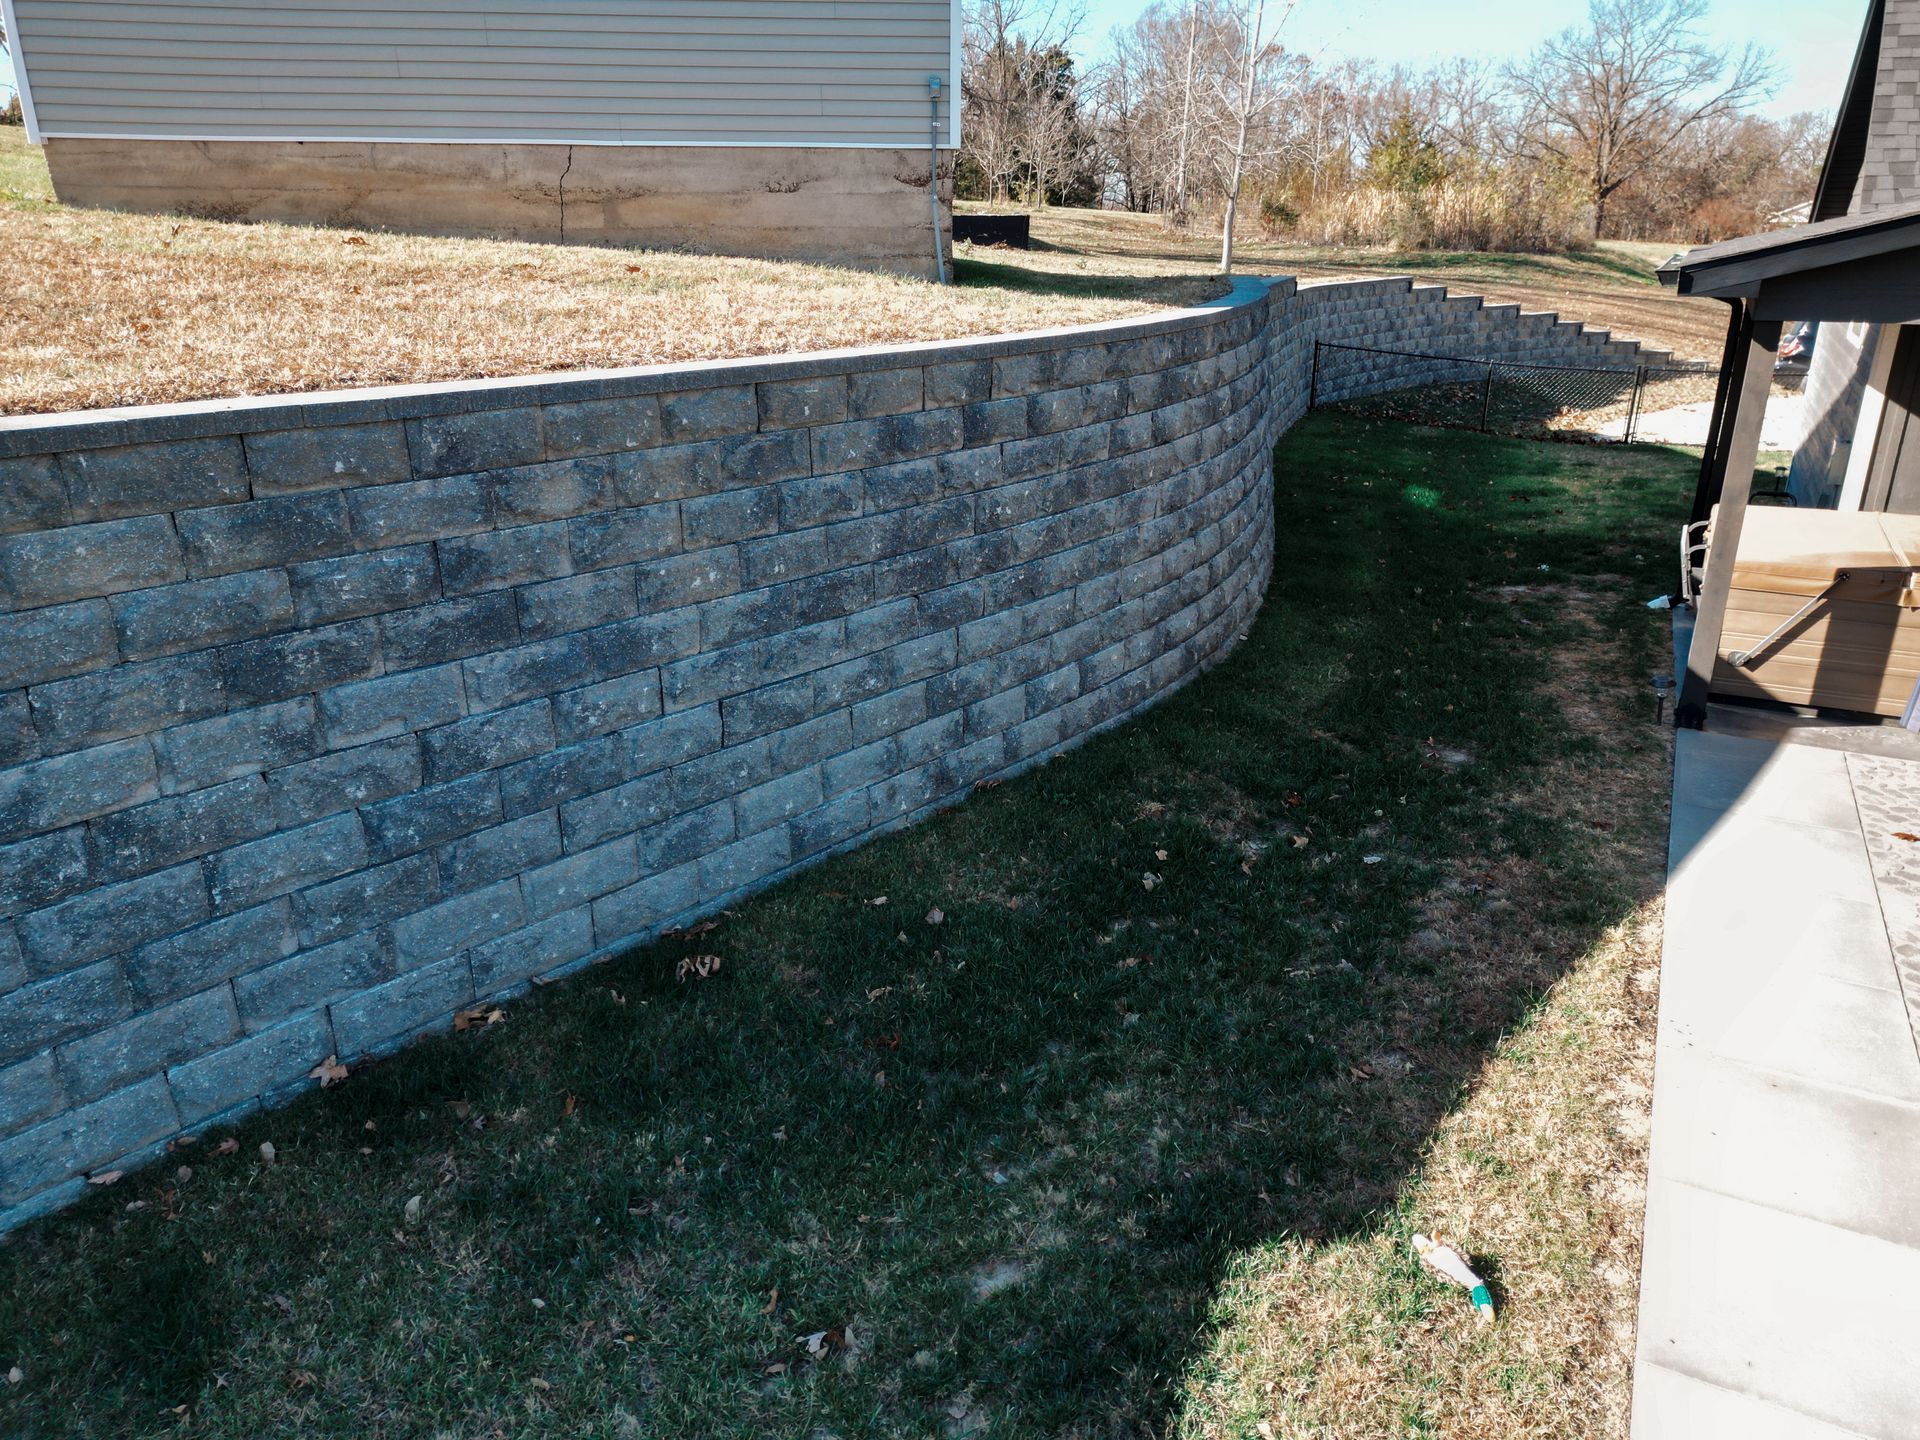 Stockman Stoneworks: Your Missouri Destination for Maytrx Retaining Wall Products.